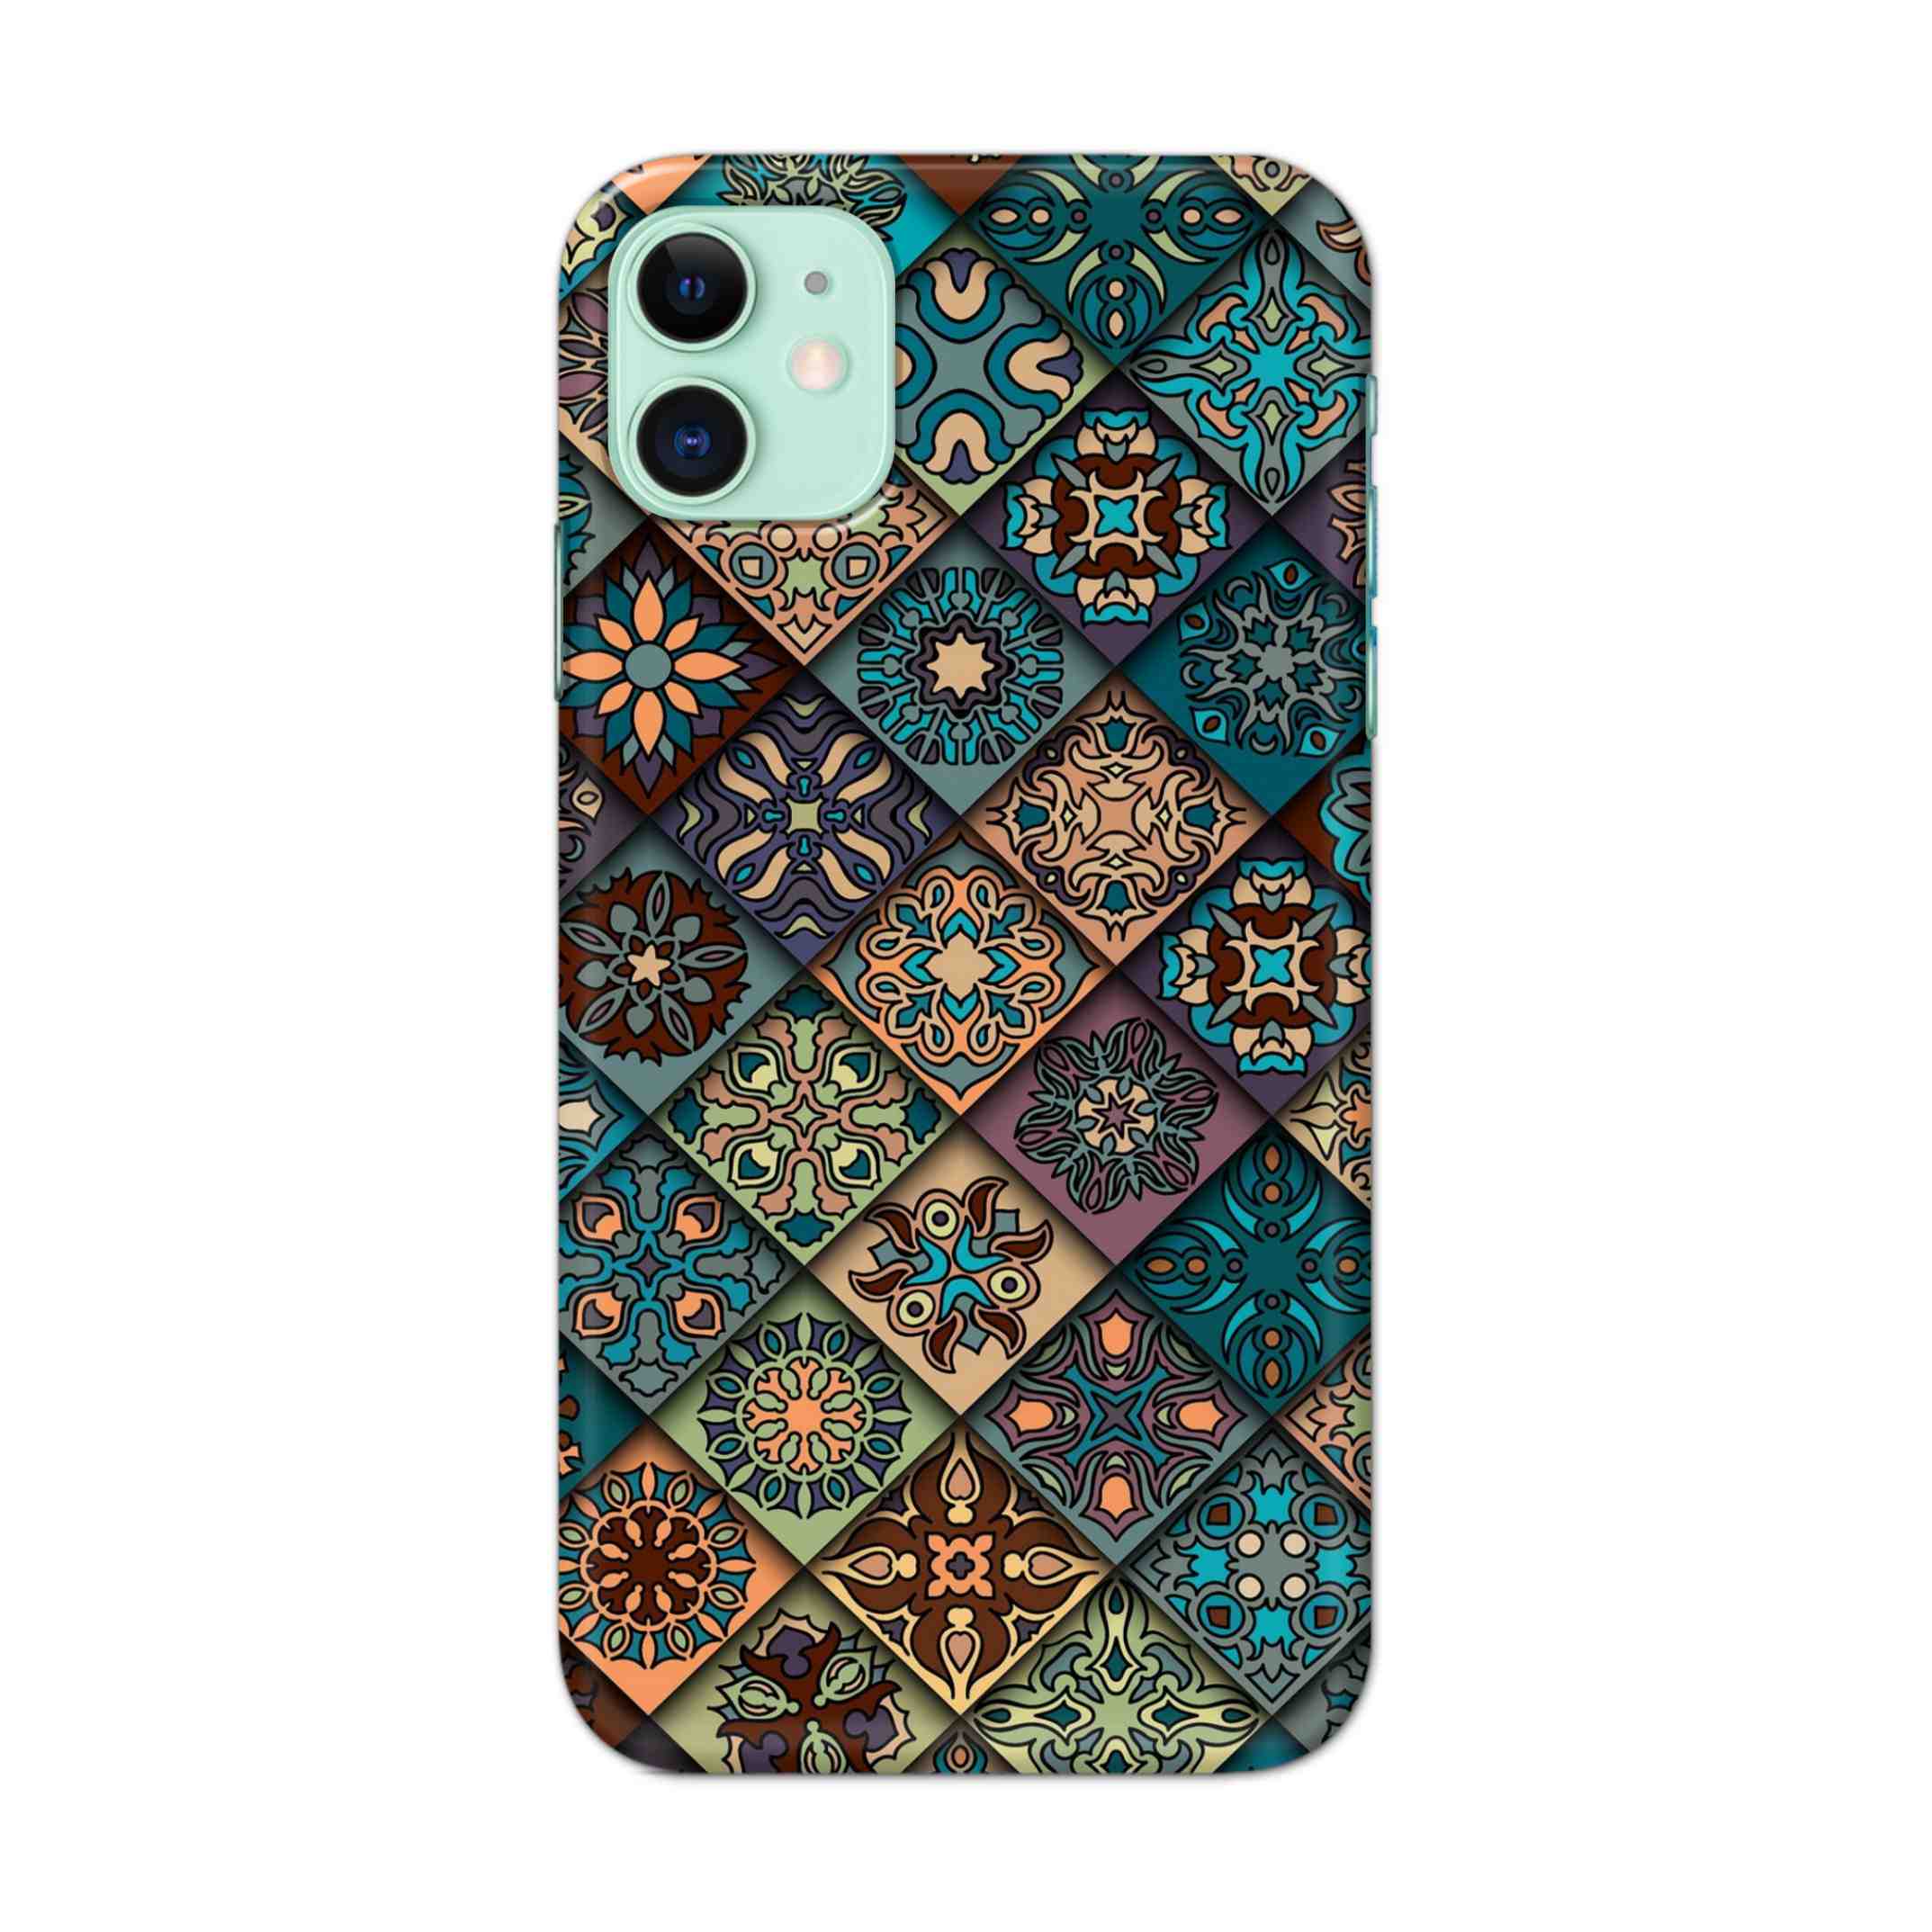 Buy Vintage Texture Hard Back Mobile Phone Case Cover For iPhone 11 Online